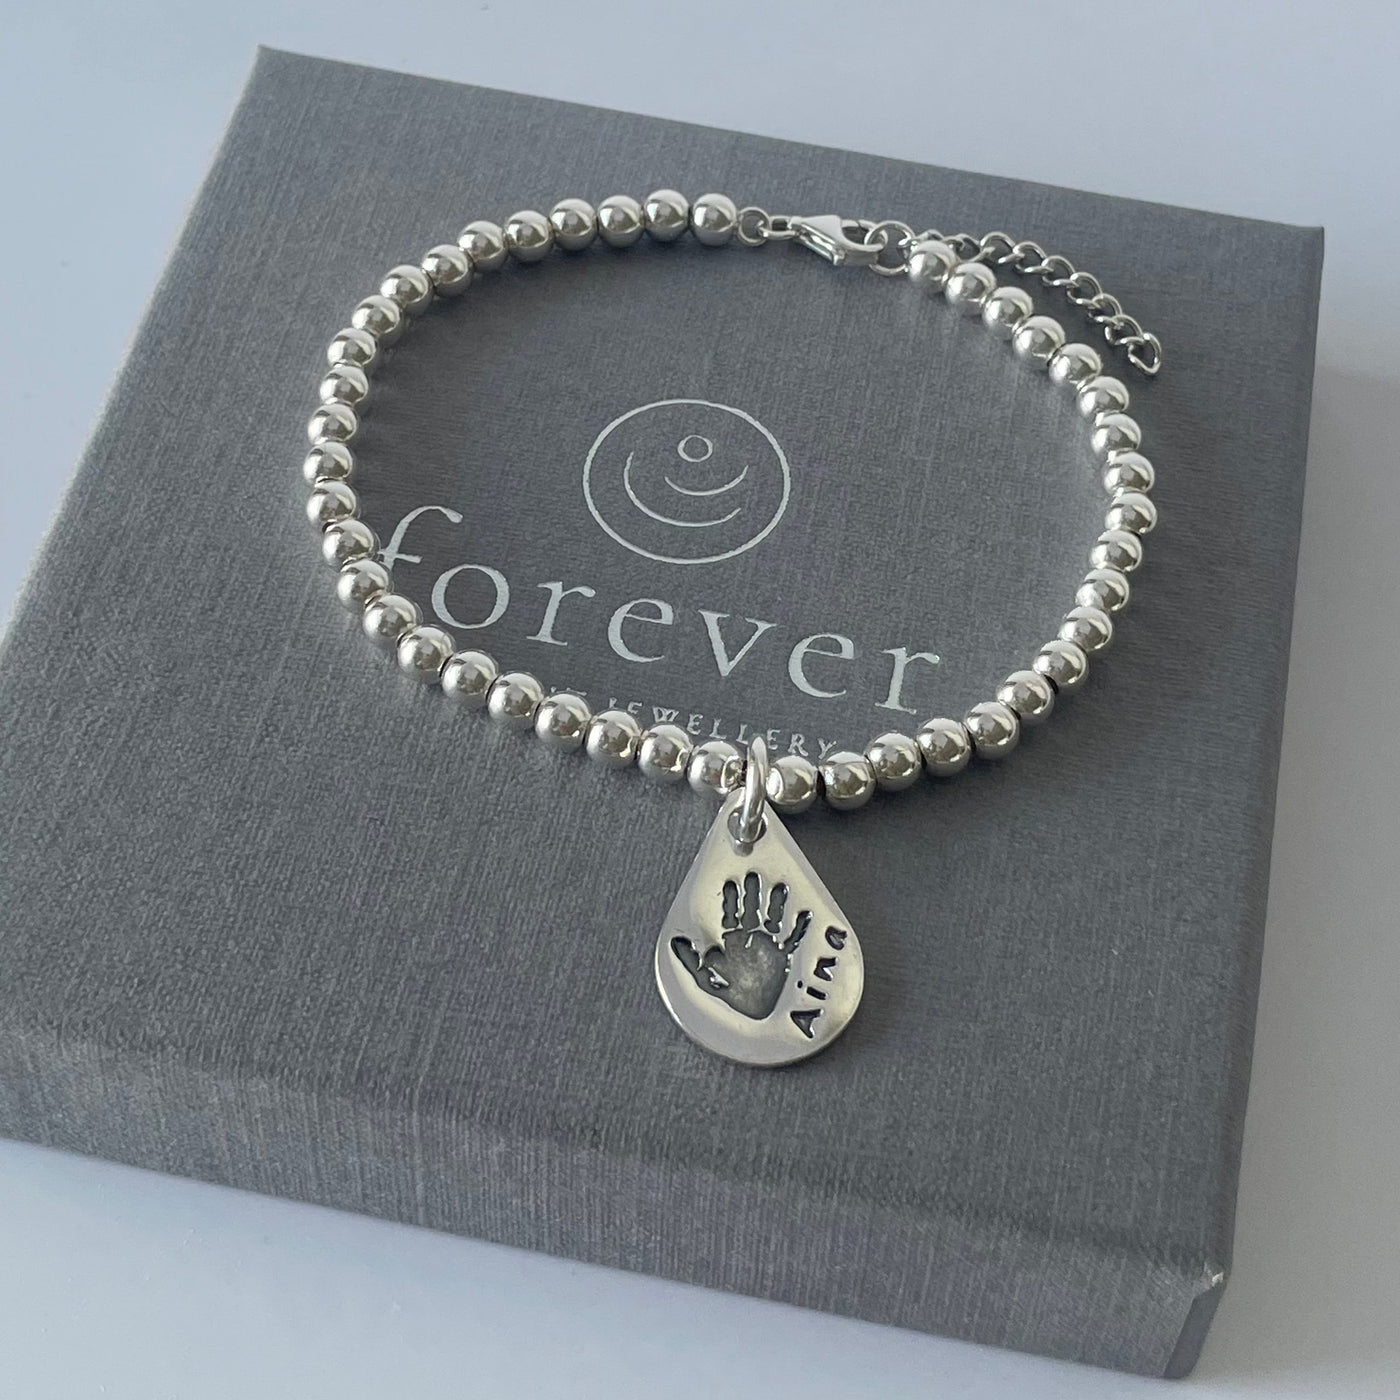 PERSONALIZED HAND OR FOOTPRINT CHARM BEAD BRACELET